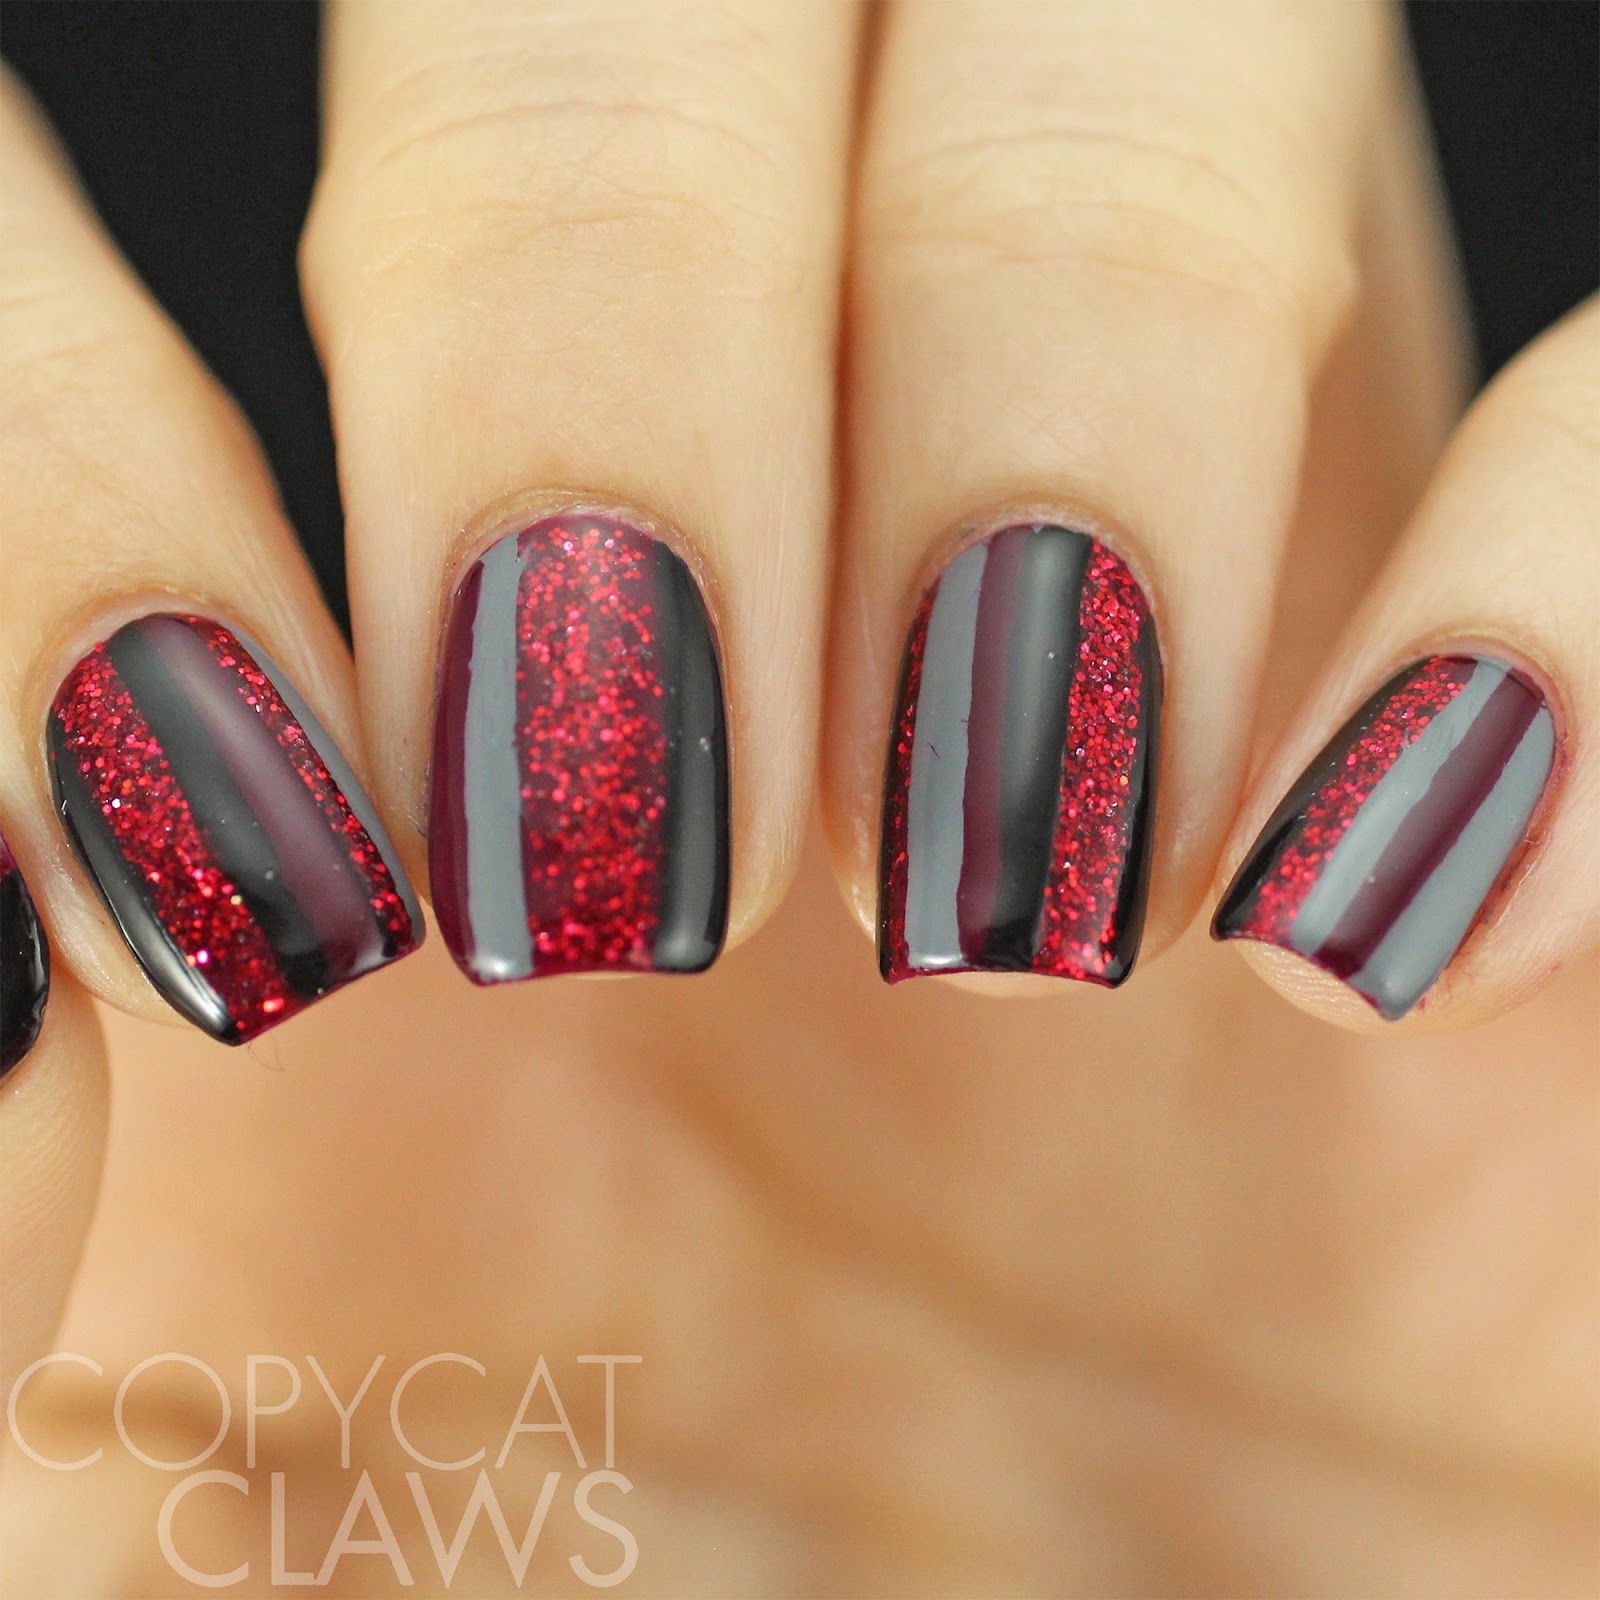 Acrylic nails with red gelish gel polish ,black glitter on… | Flickr